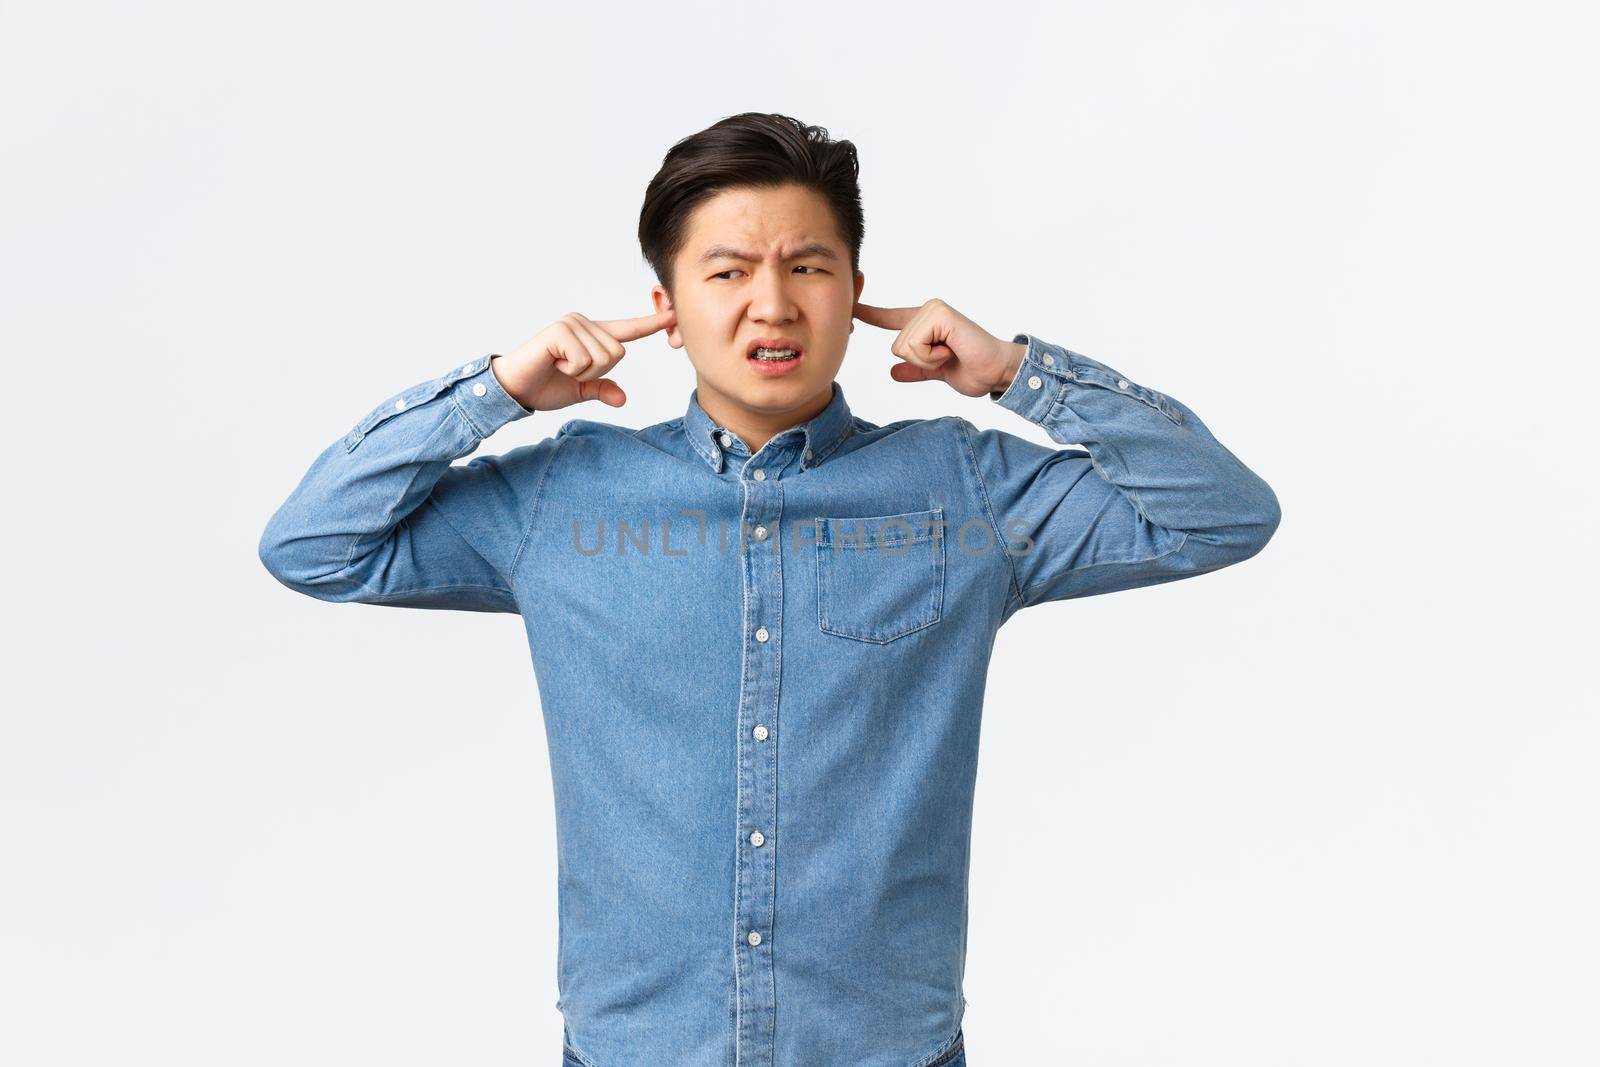 Disturbed and frustrated asian man complaining loud noise, shut ears and looking left displeased, frowning upset, telling neighbour be quiet, college student cant focus because of noisy awful music.